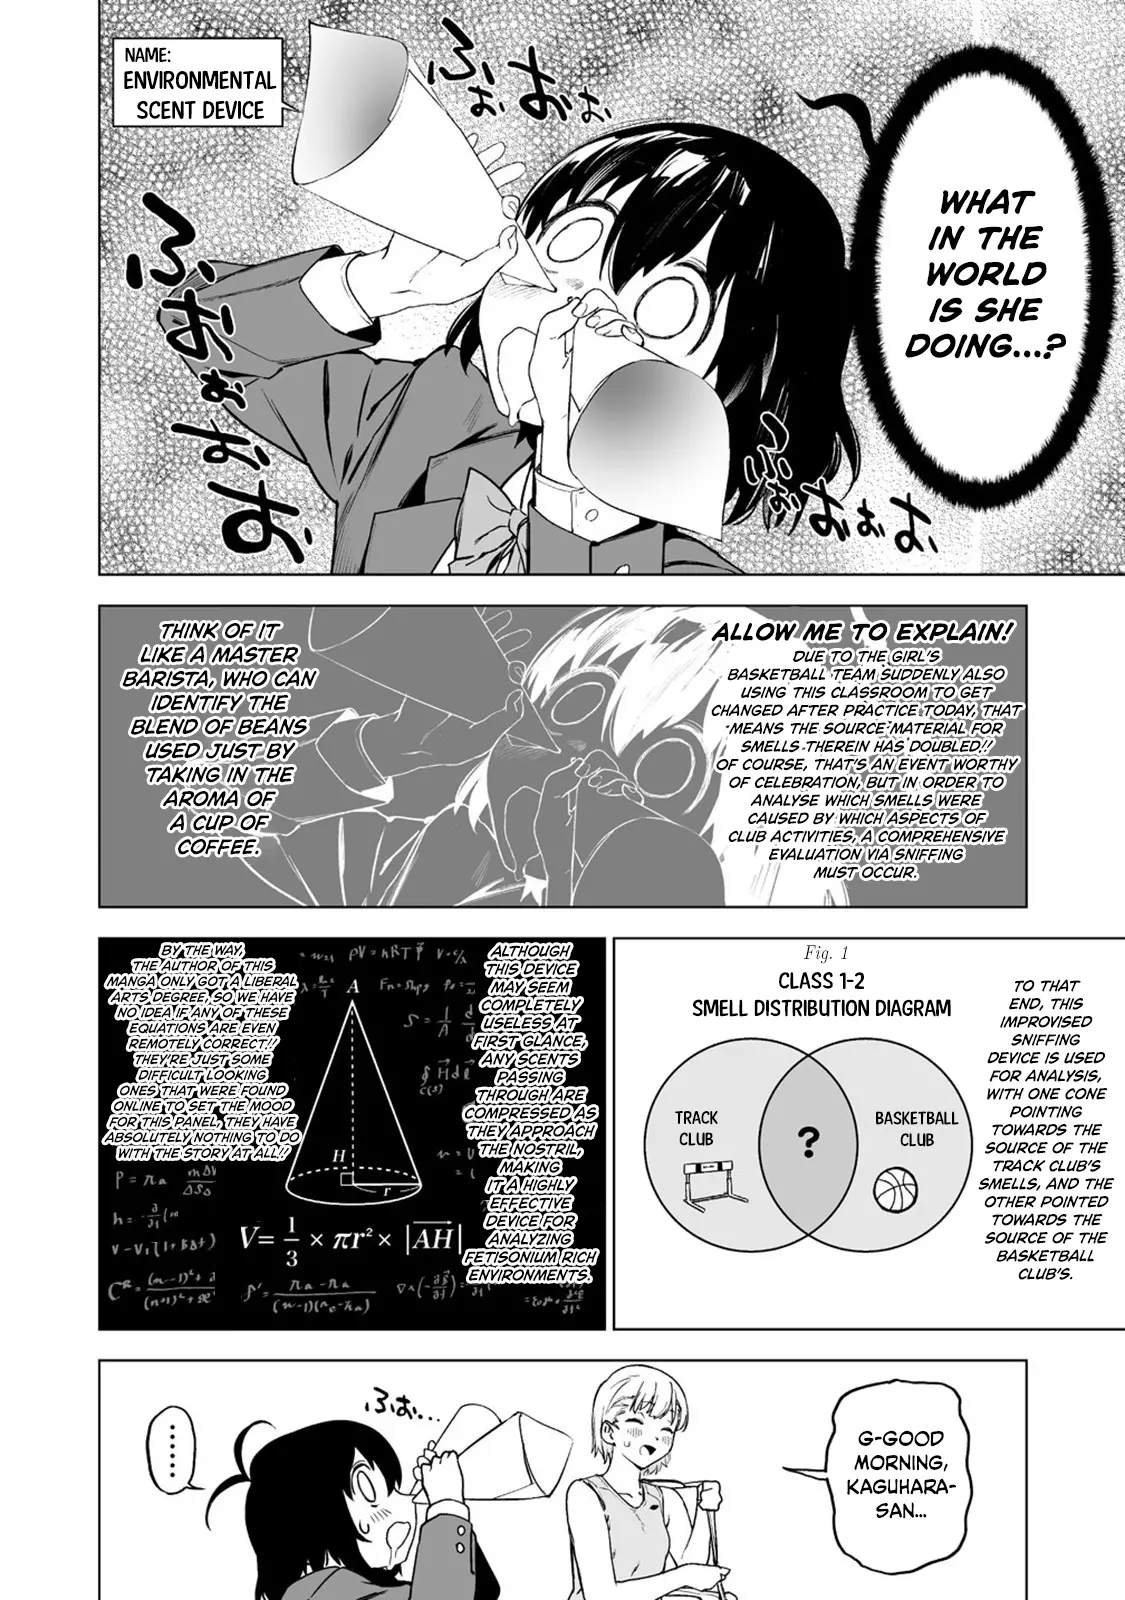 Kaguhara's Fetish Notebook - 4 page 6-2e6c2d29